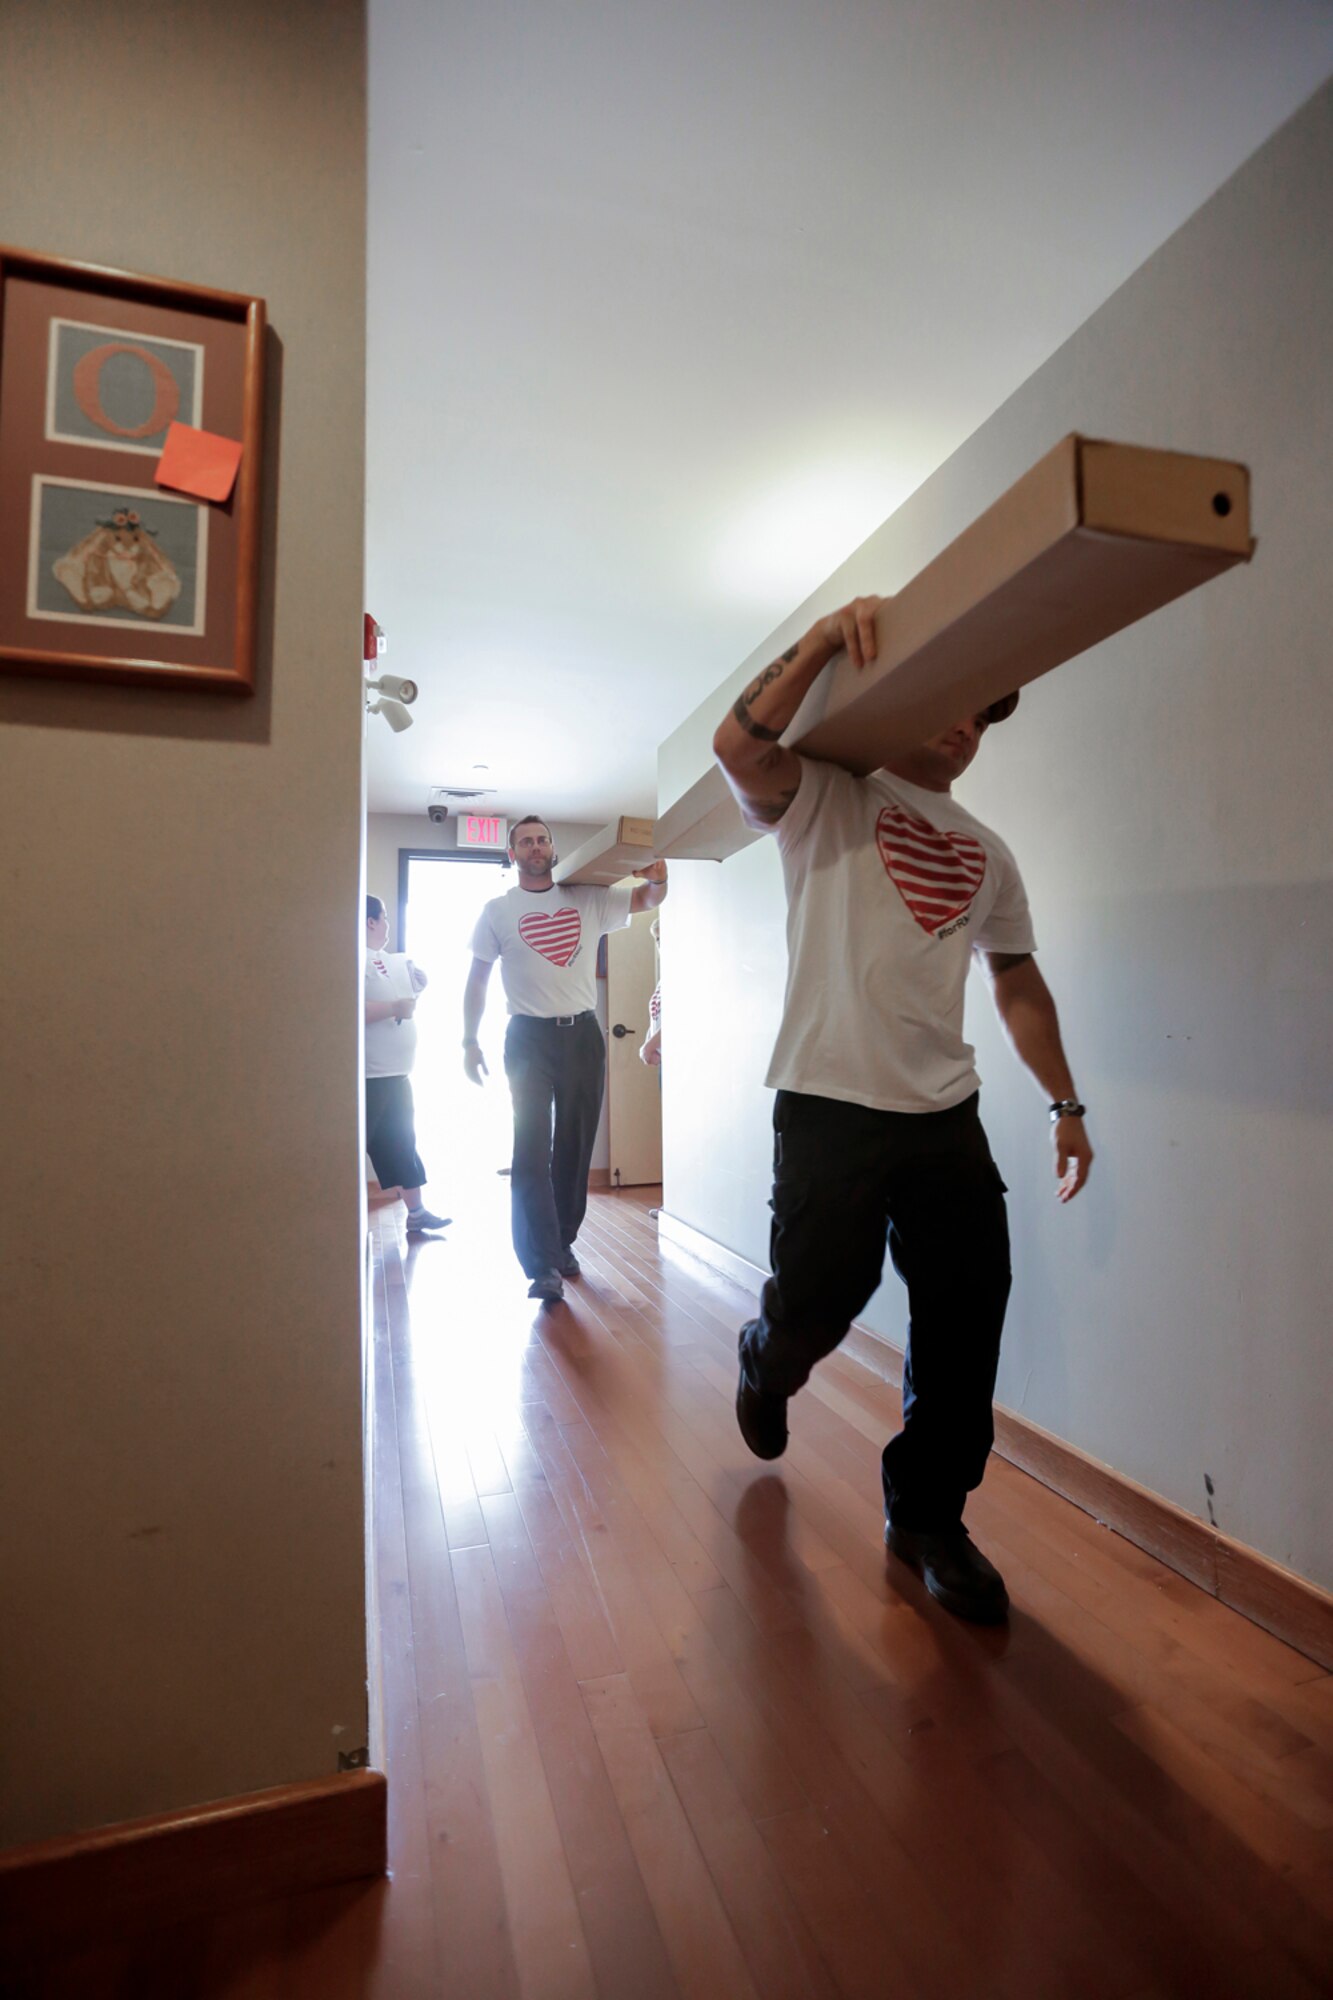 Members of the 138th Fighter Wing (FW) carry bed frames to waiting bedrooms March 29, 2015, at the Ronald McDonald House of Tulsa.  Volunteers from the 138th Fighter Wing assisted at the house upon the arrival of a large shipment new beds and mattresses. (U.S. National Guard photo by Master Sgt. Mark A. Moore/Released)